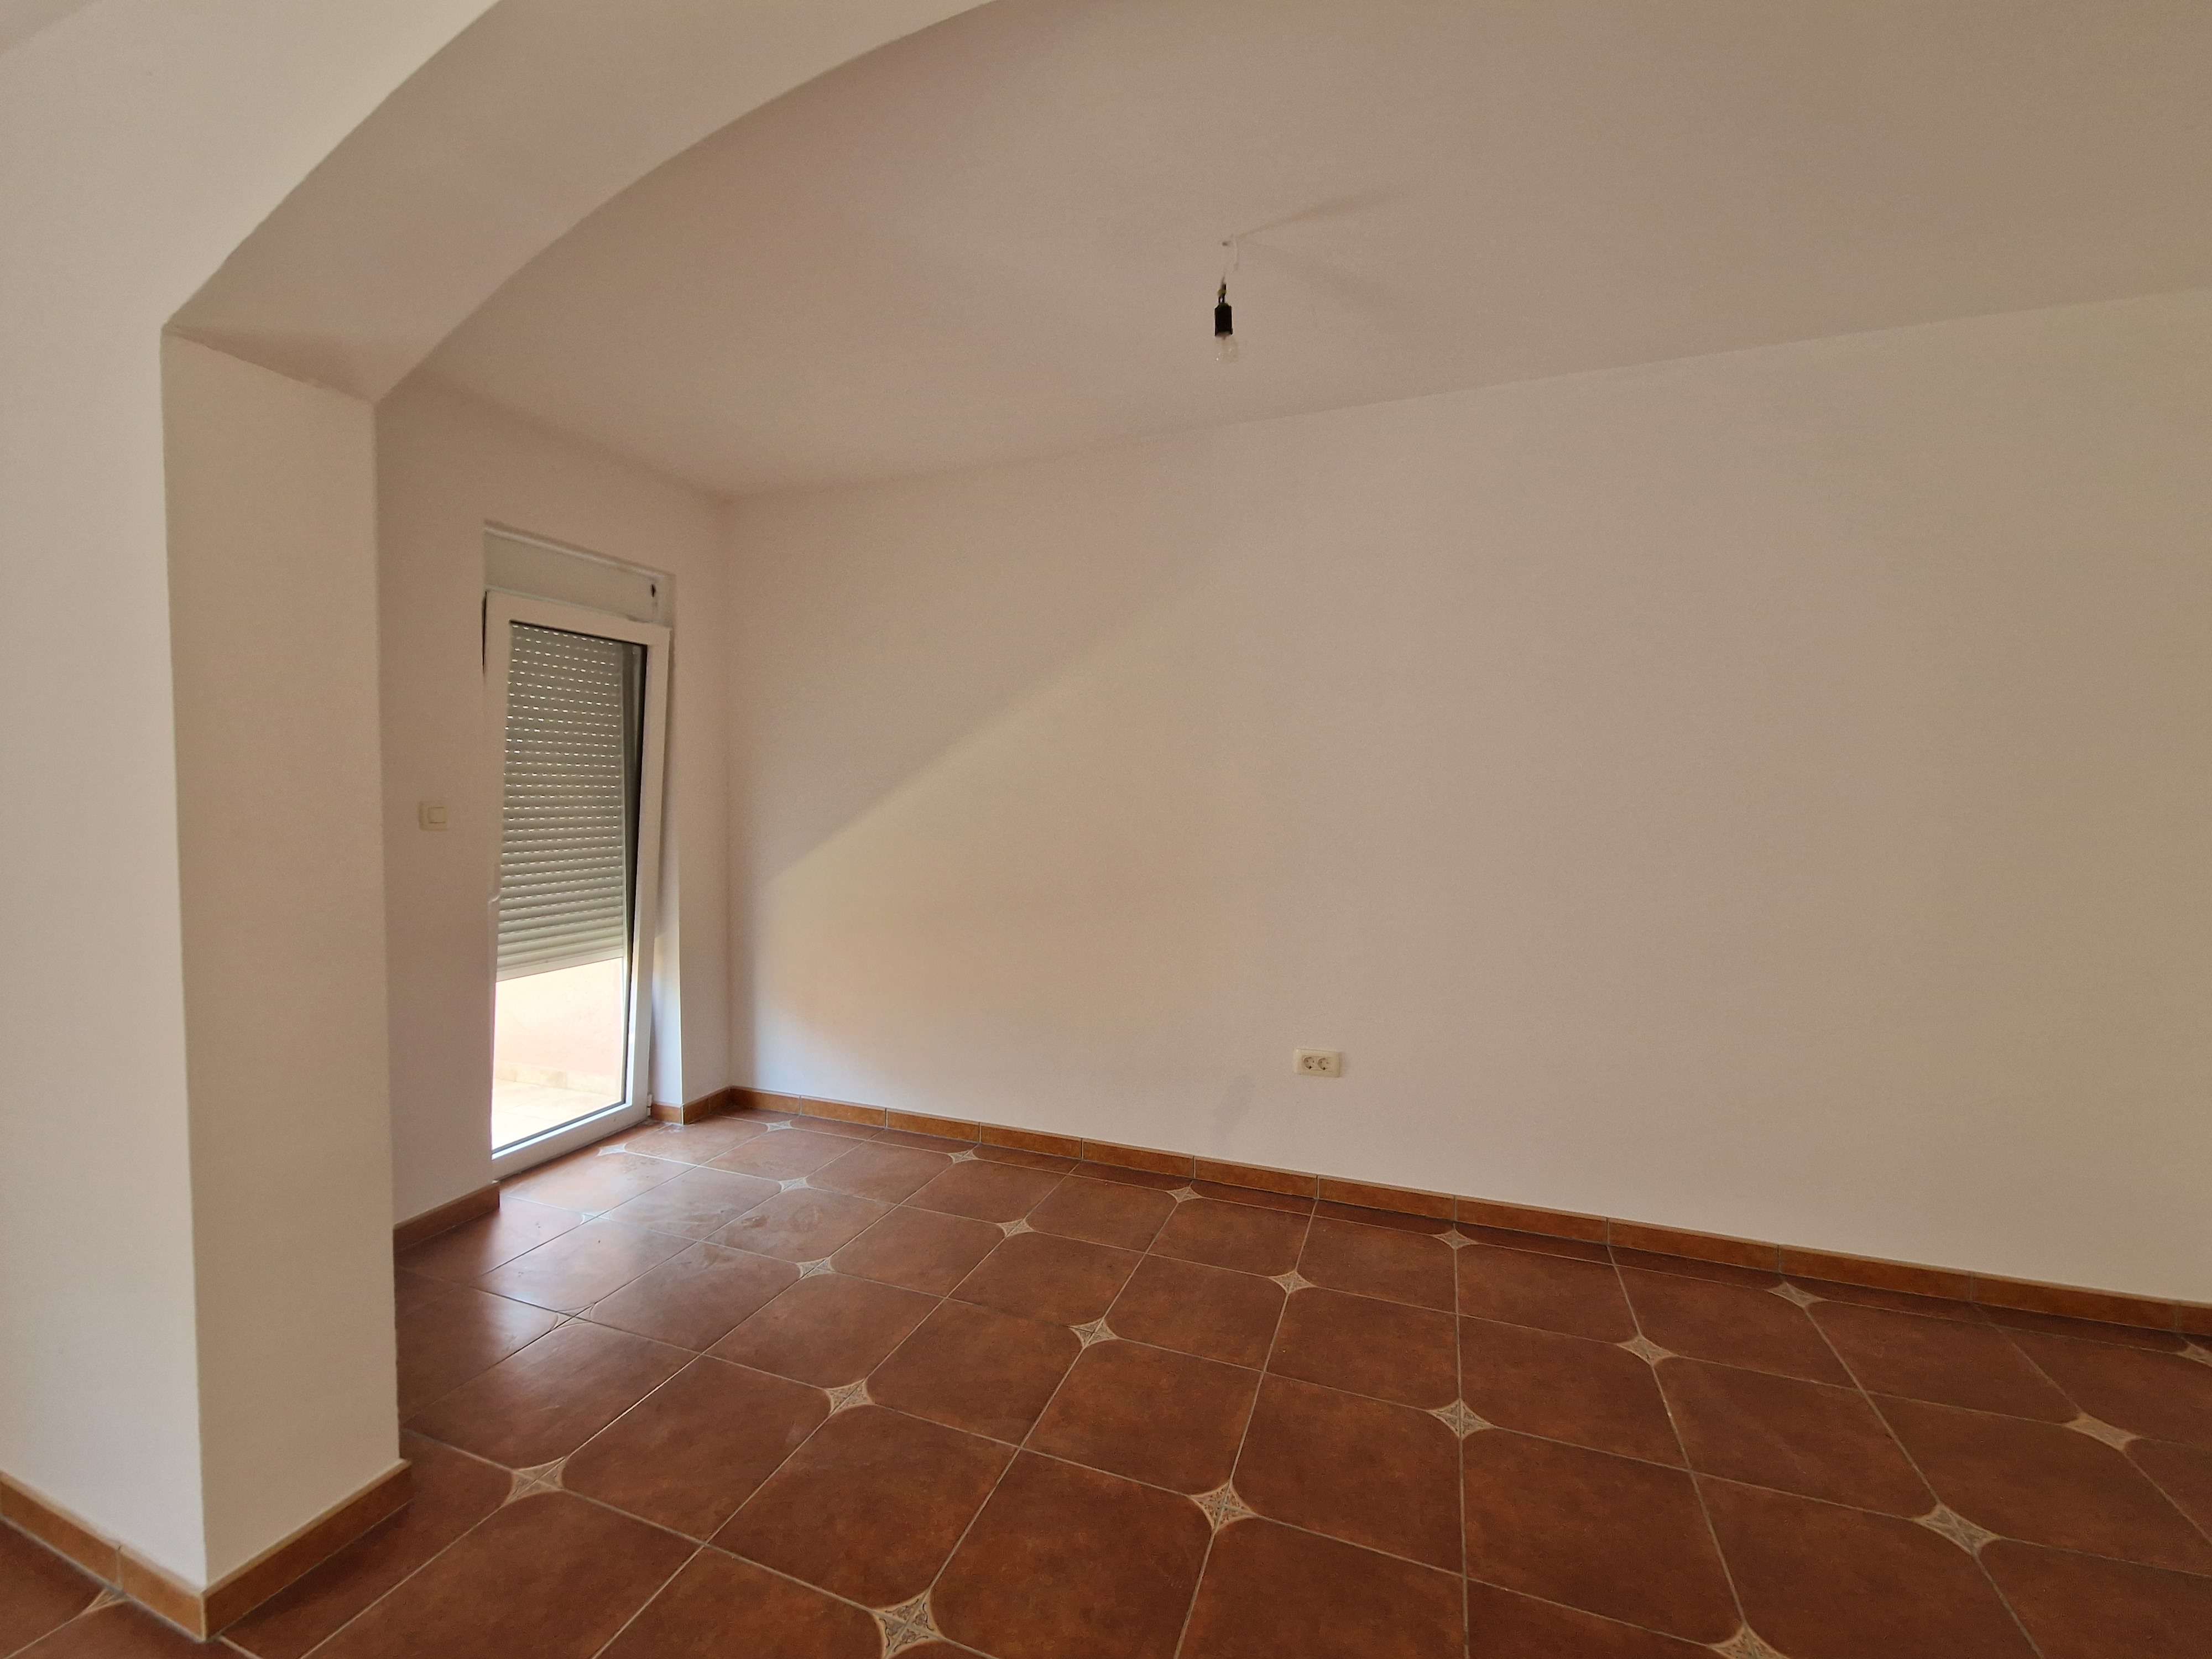 2-bedroom apartment with a sea view in Kotor